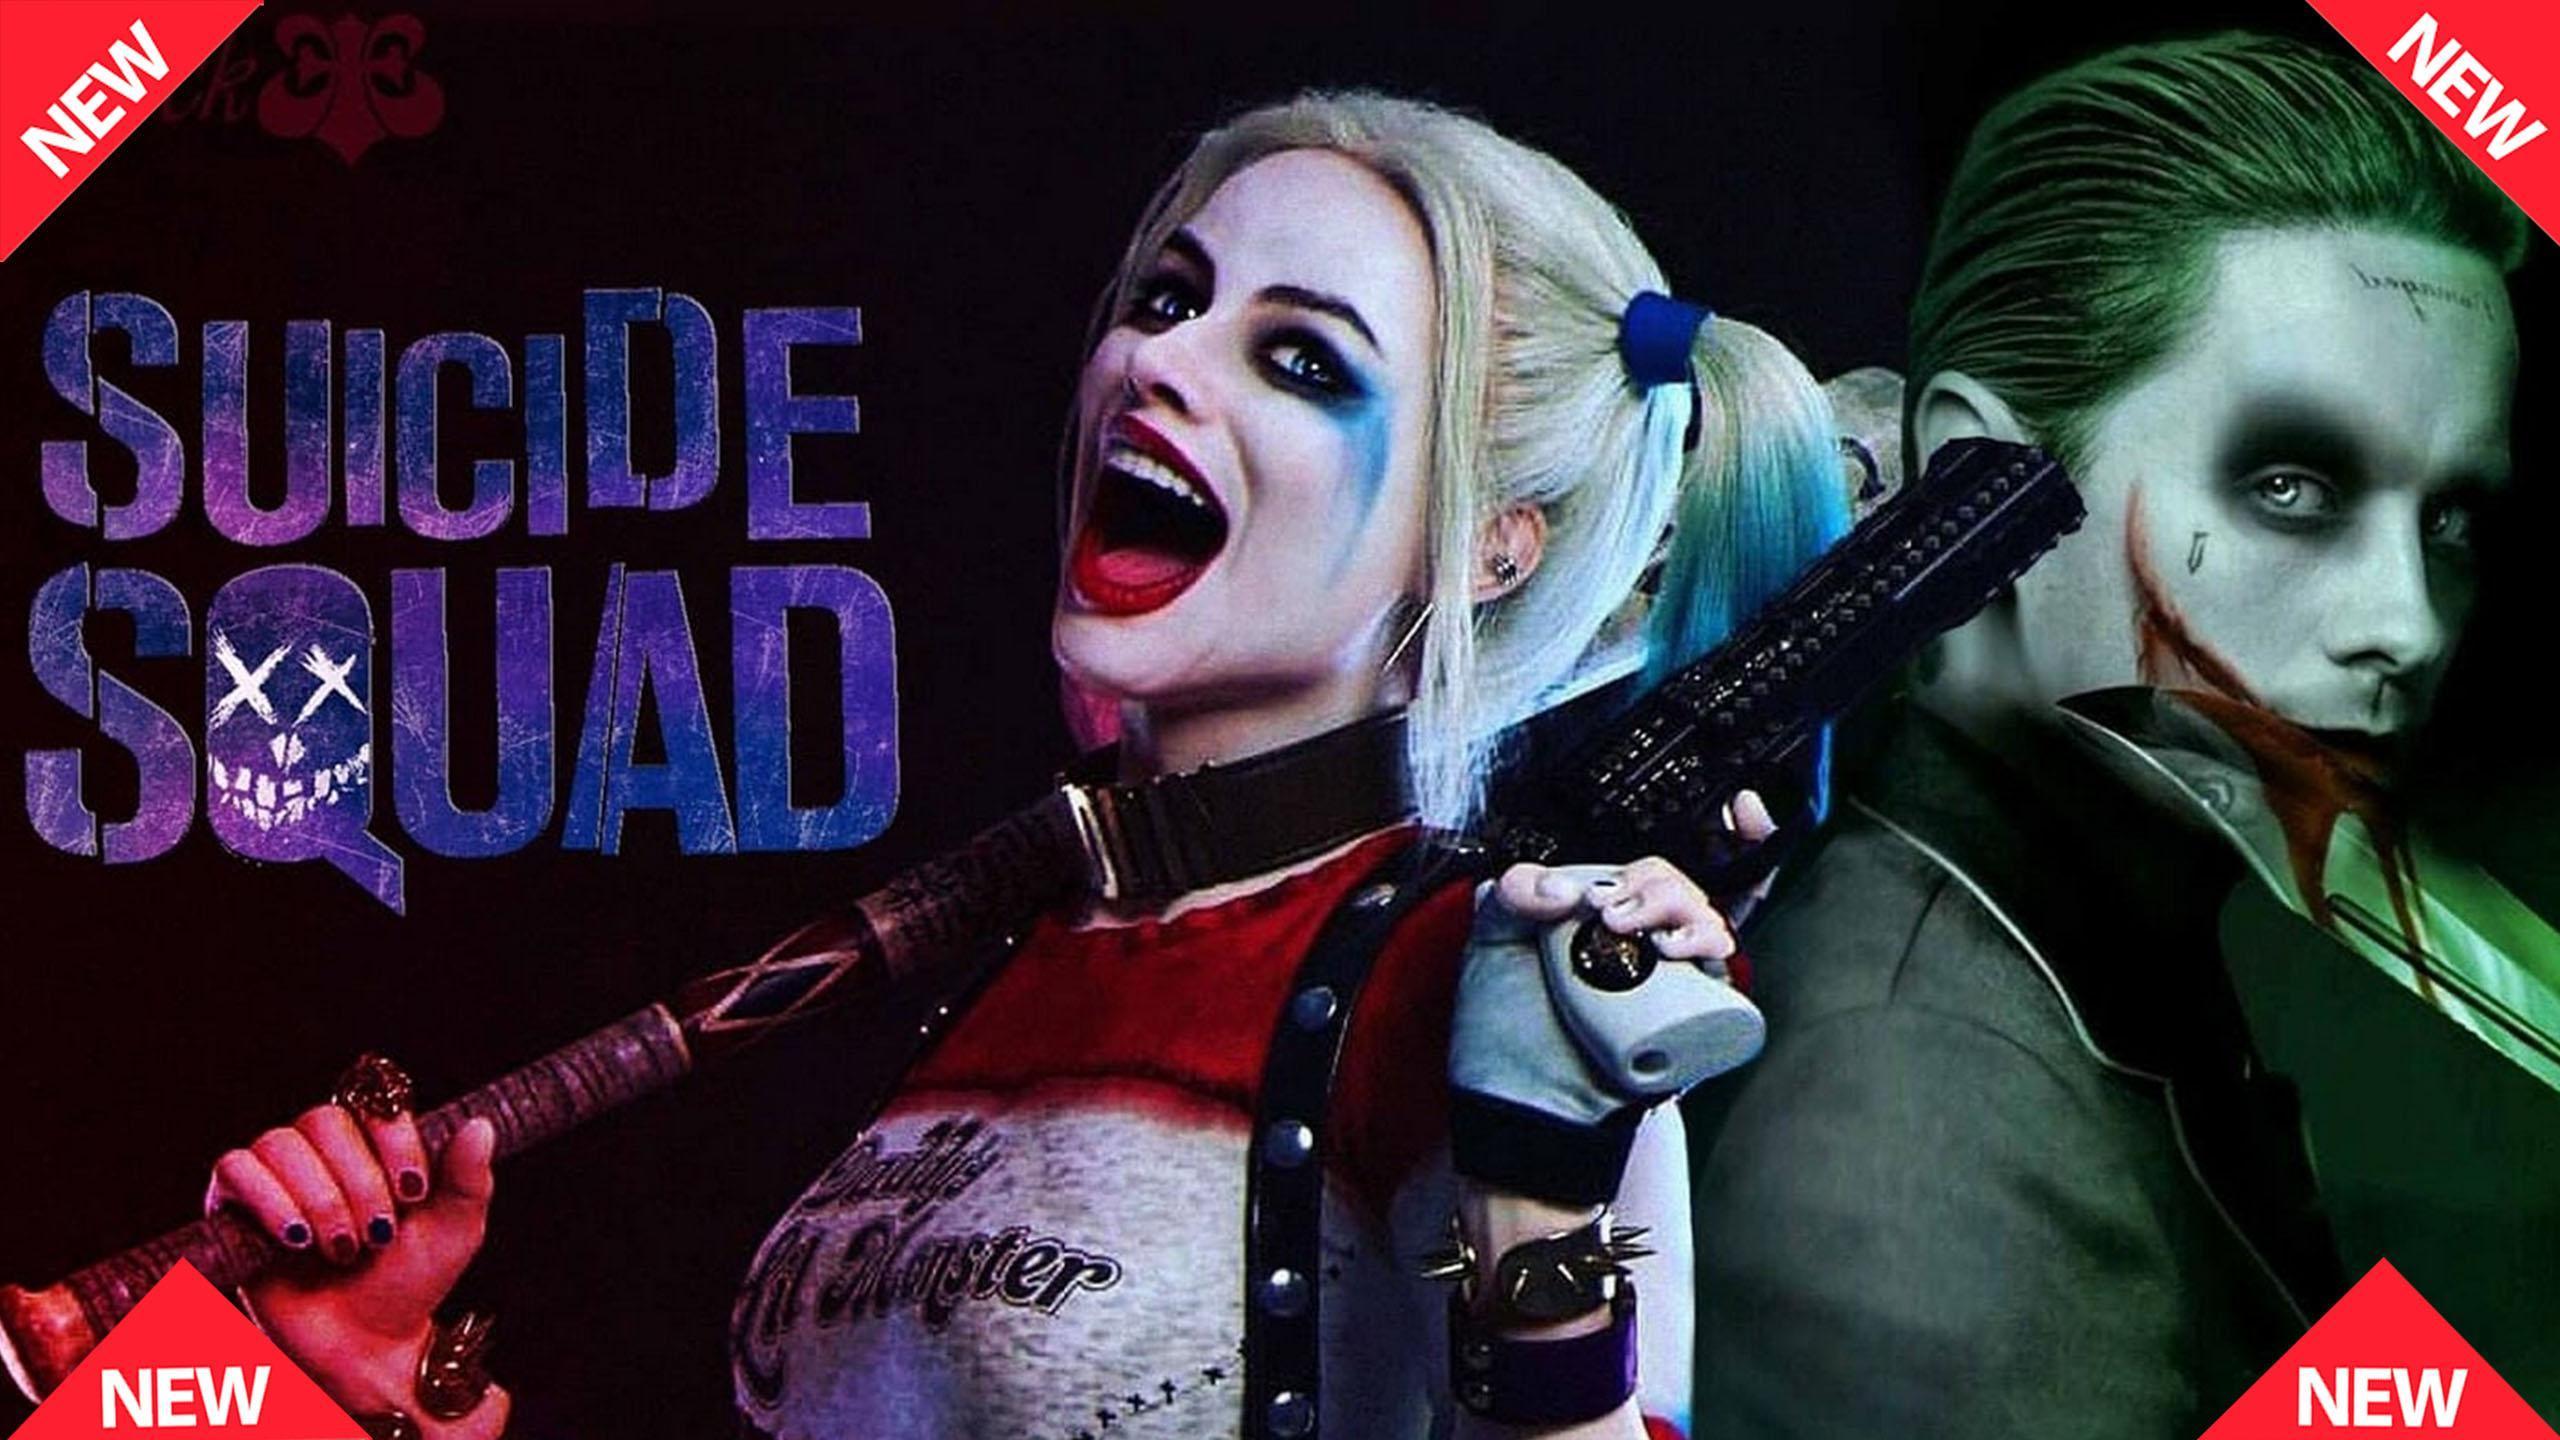 Harley Quinn And Joker Wallpaper HD for Android